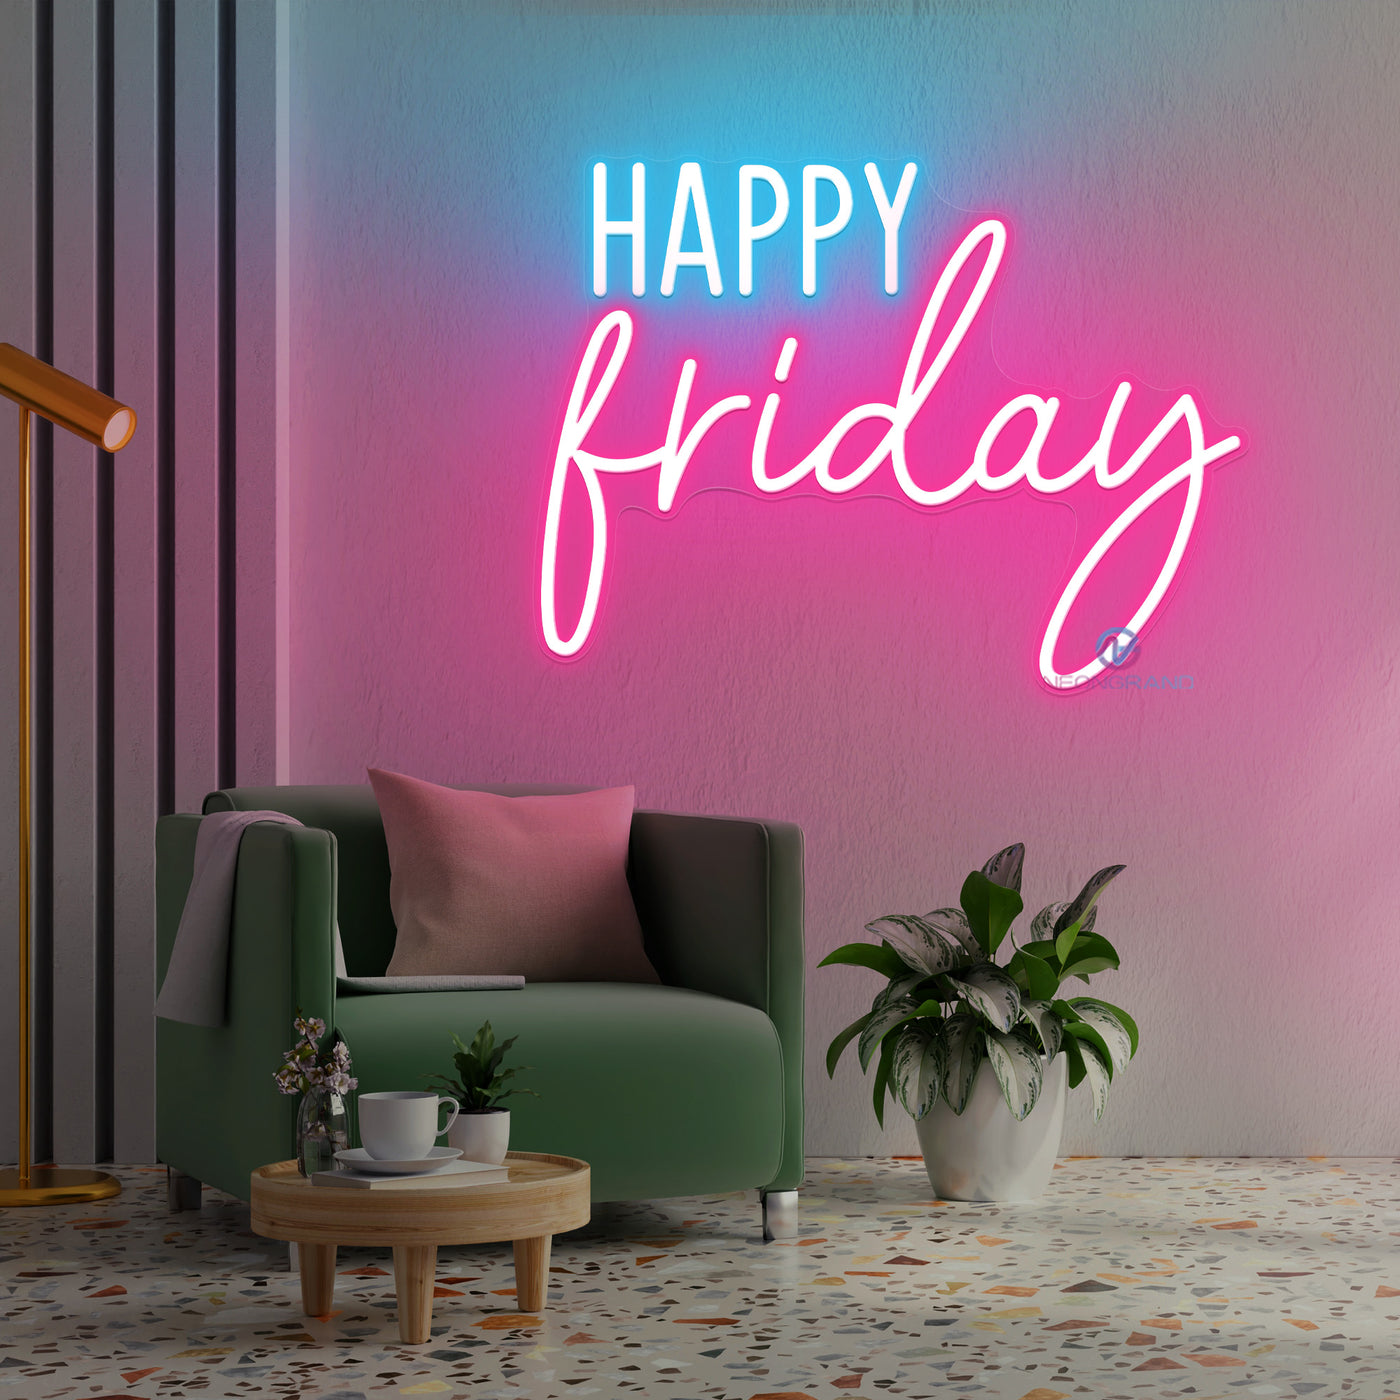 Happy Friday Neon Sign Led Light pink